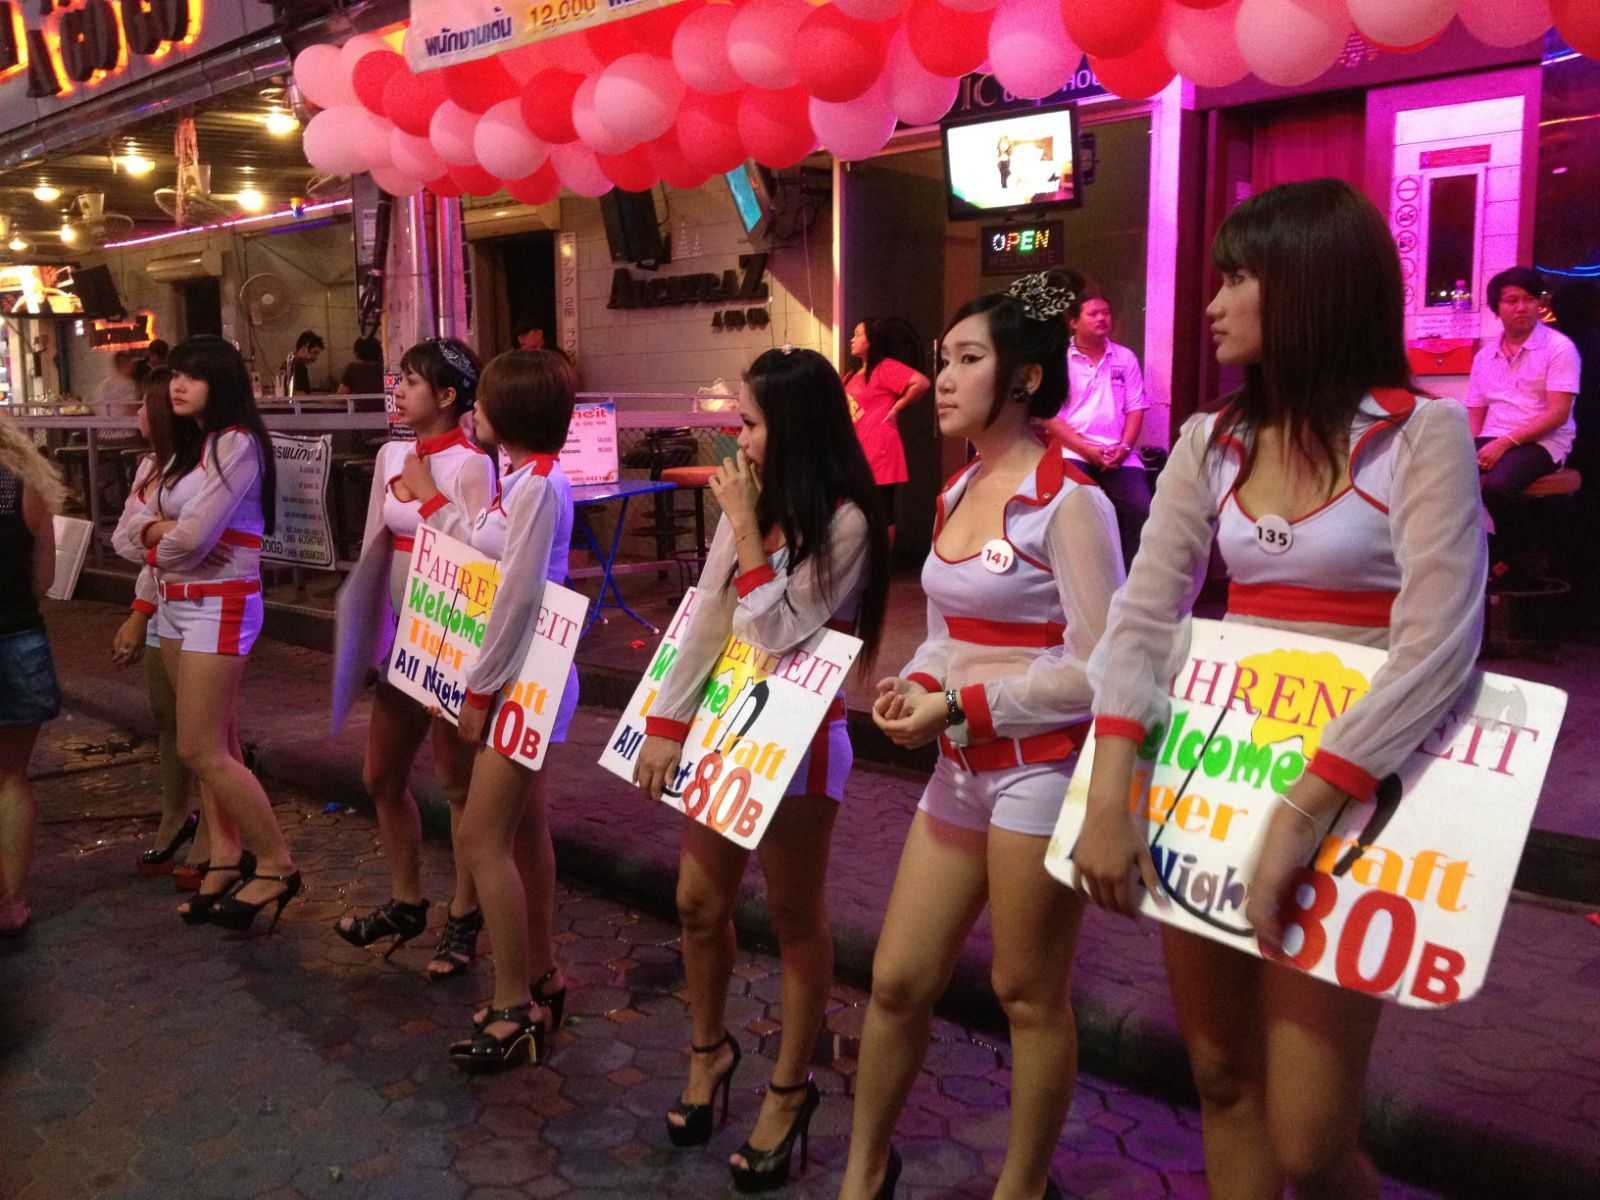 Pattaya-A panoramic view of the nightlife in Pattaya, Thailand's red light district and prices